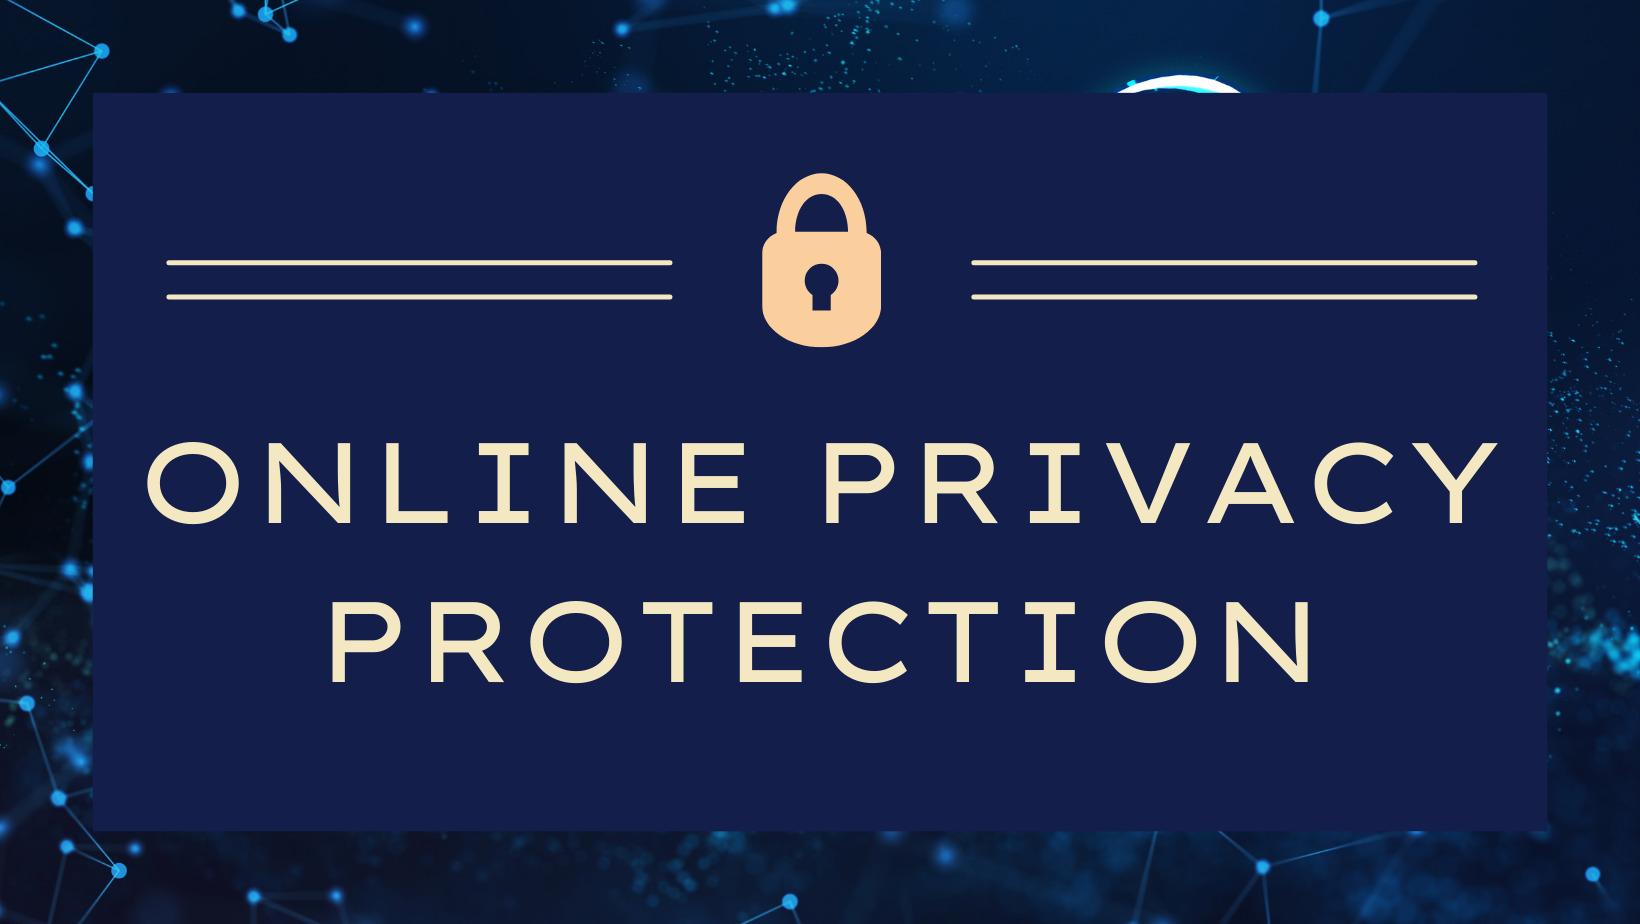 Online privacy protection